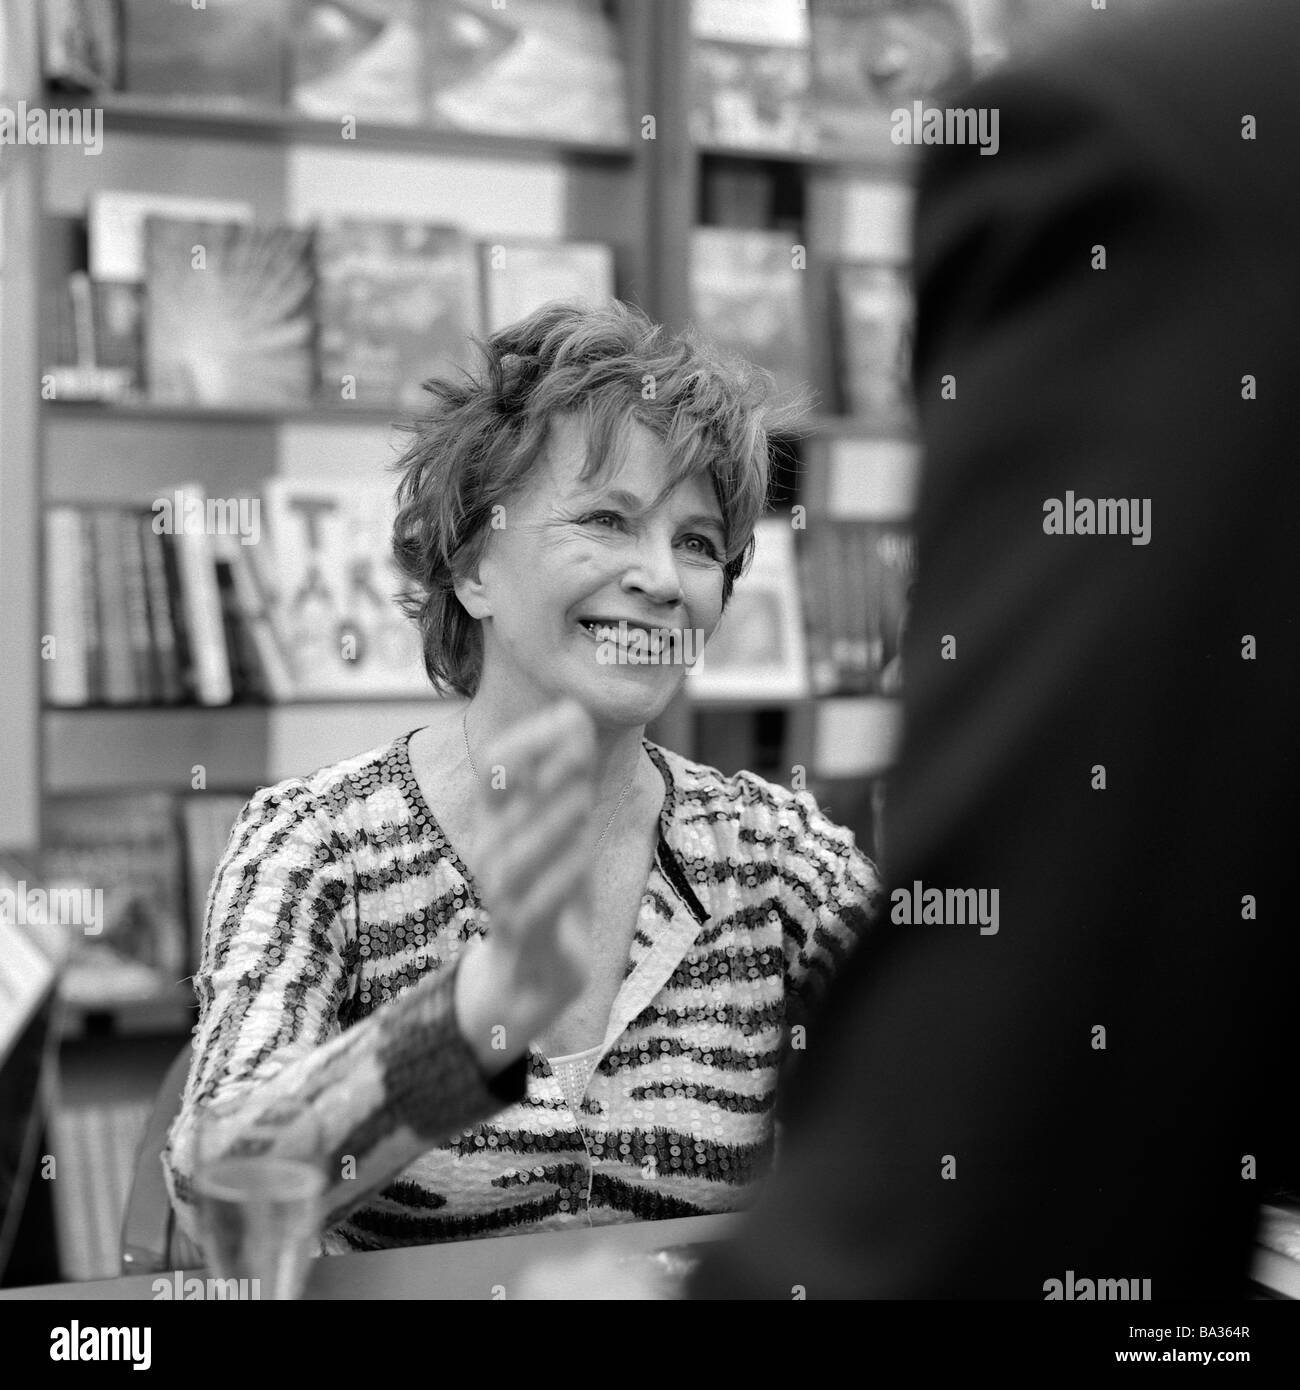 Irish author Edna O'Brien book signing at the 2002 Hay Festival in Hay-on-Wye Wales UK   KATHY DEWITT Stock Photo